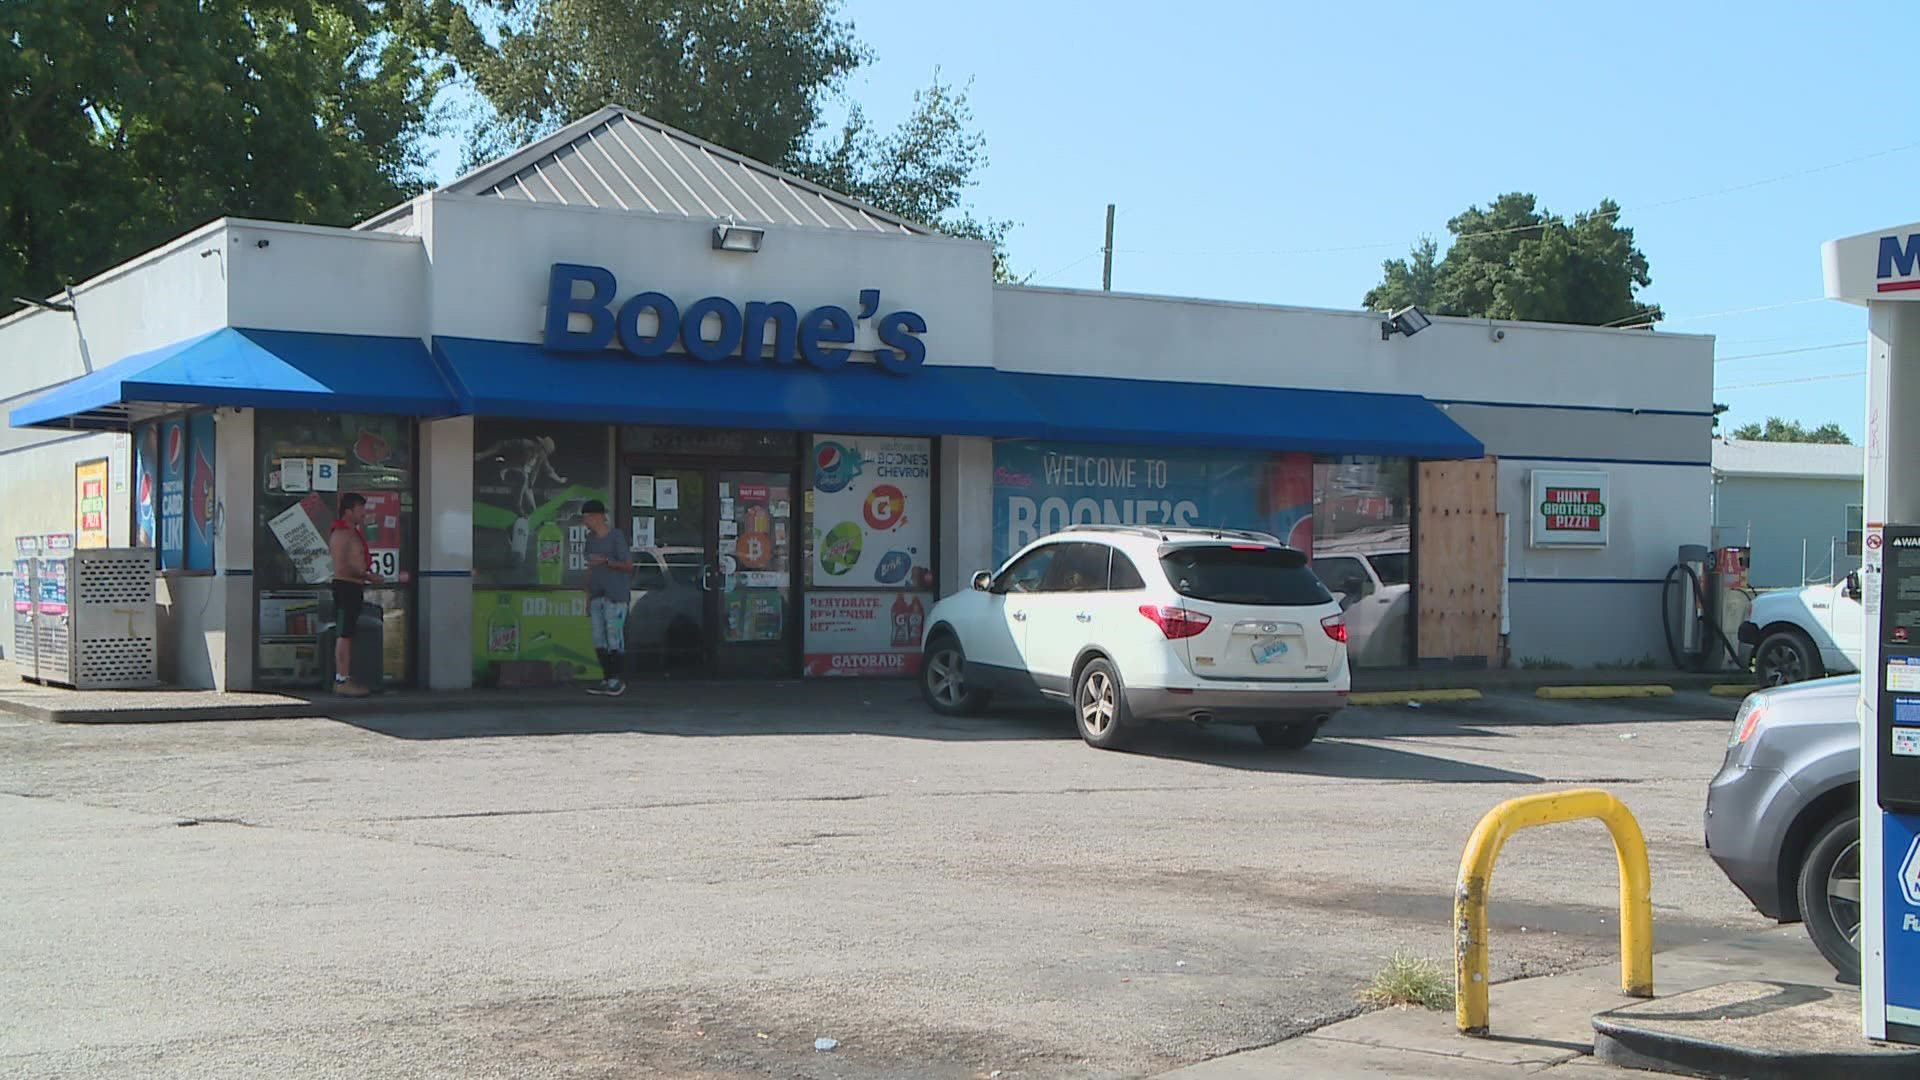 Days after the city issued an order for the gas station to vacate due to recent crimes on the property, Boone's Marathon owners have appealed the order.